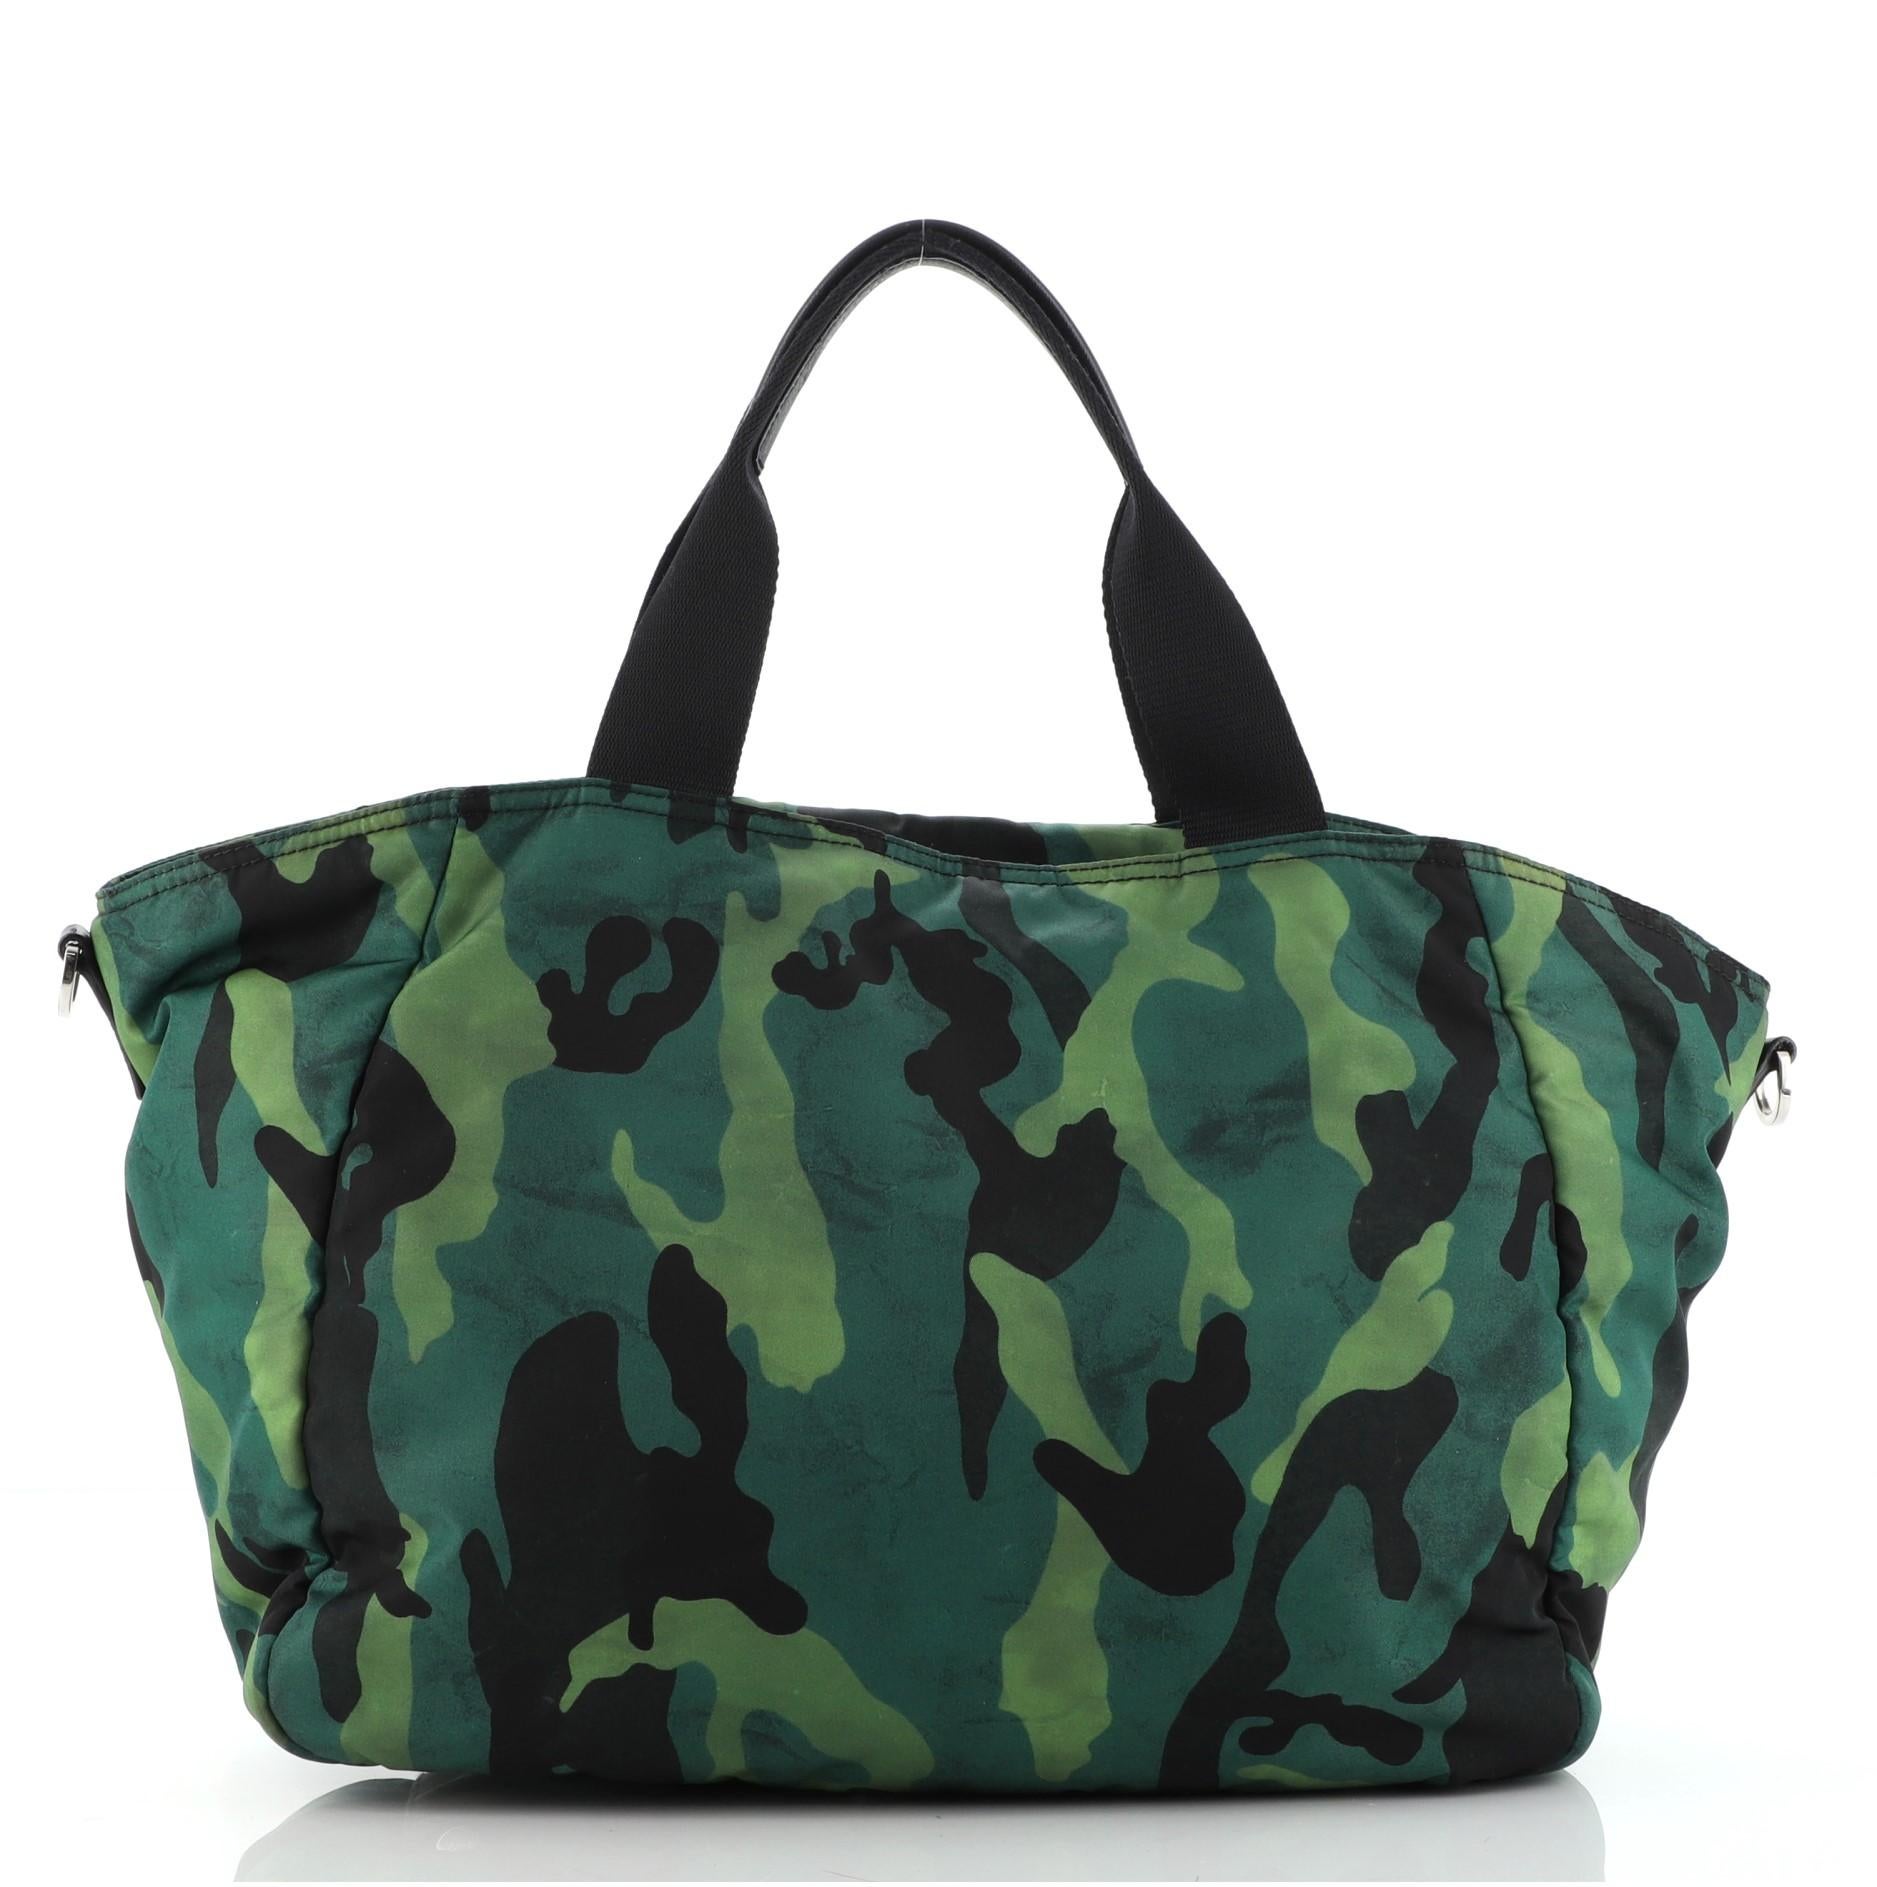 Prada Green Tessuto Print Camouflage Convertible Large Pocket Tote Bag features green Tessuto nylon camouflage print with one external zipped pocket, two black canvas handle covered by black leather, black fabric lining and silver-tone hardware. 

